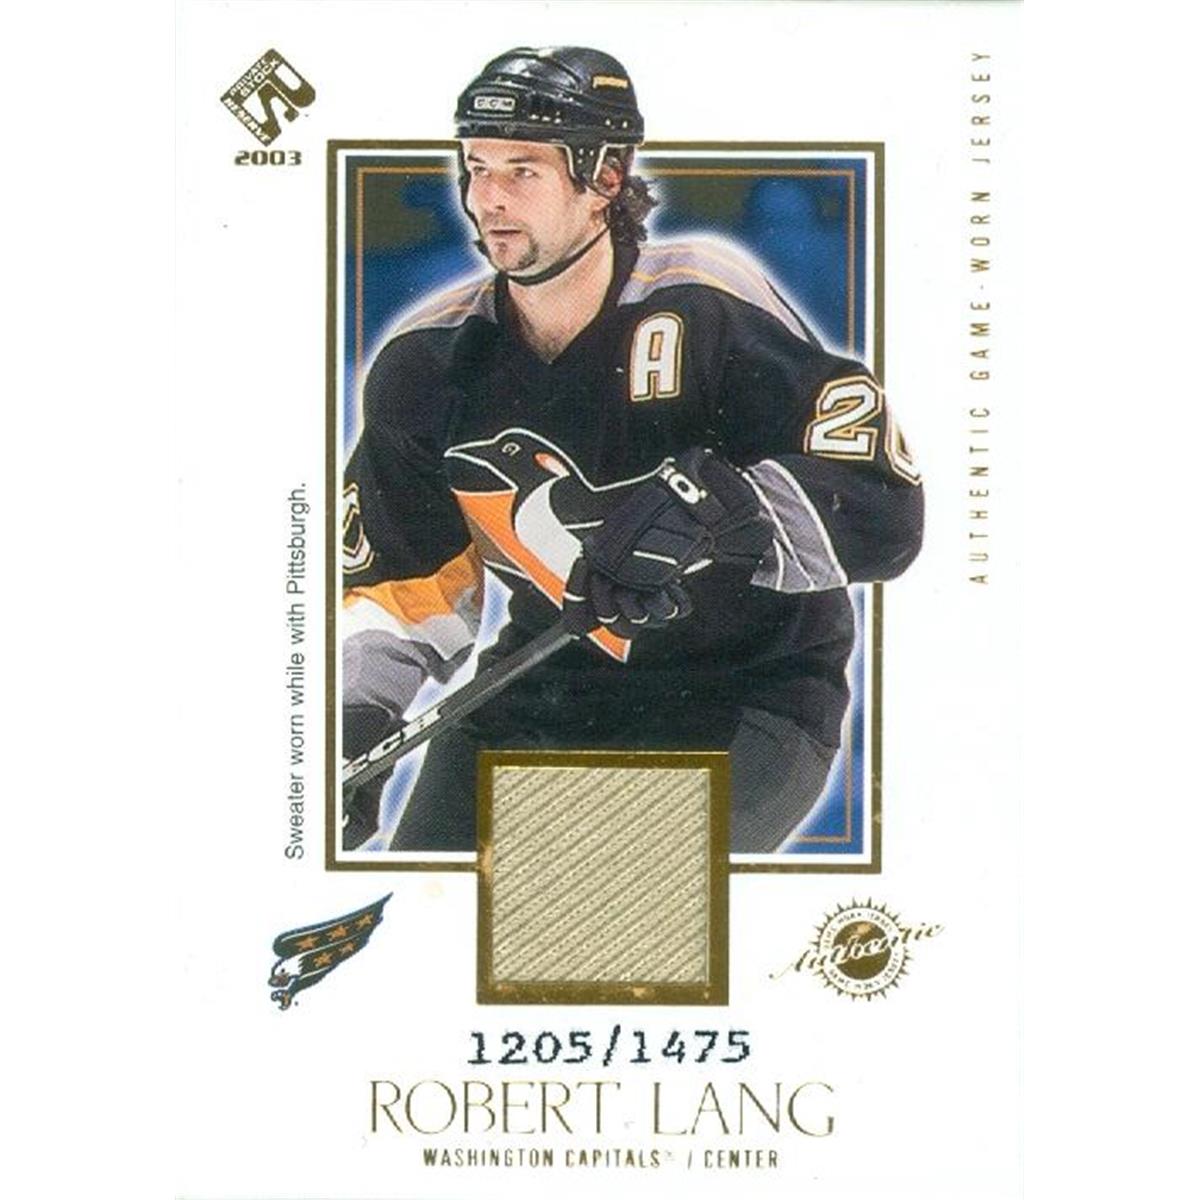 466239 Robert Lang Player Worn Jersey Patch Hockey Card, Washington Capitals - 2003 Pacific Private Stock No.150 LE 1205 by 1475 -  Autograph Warehouse